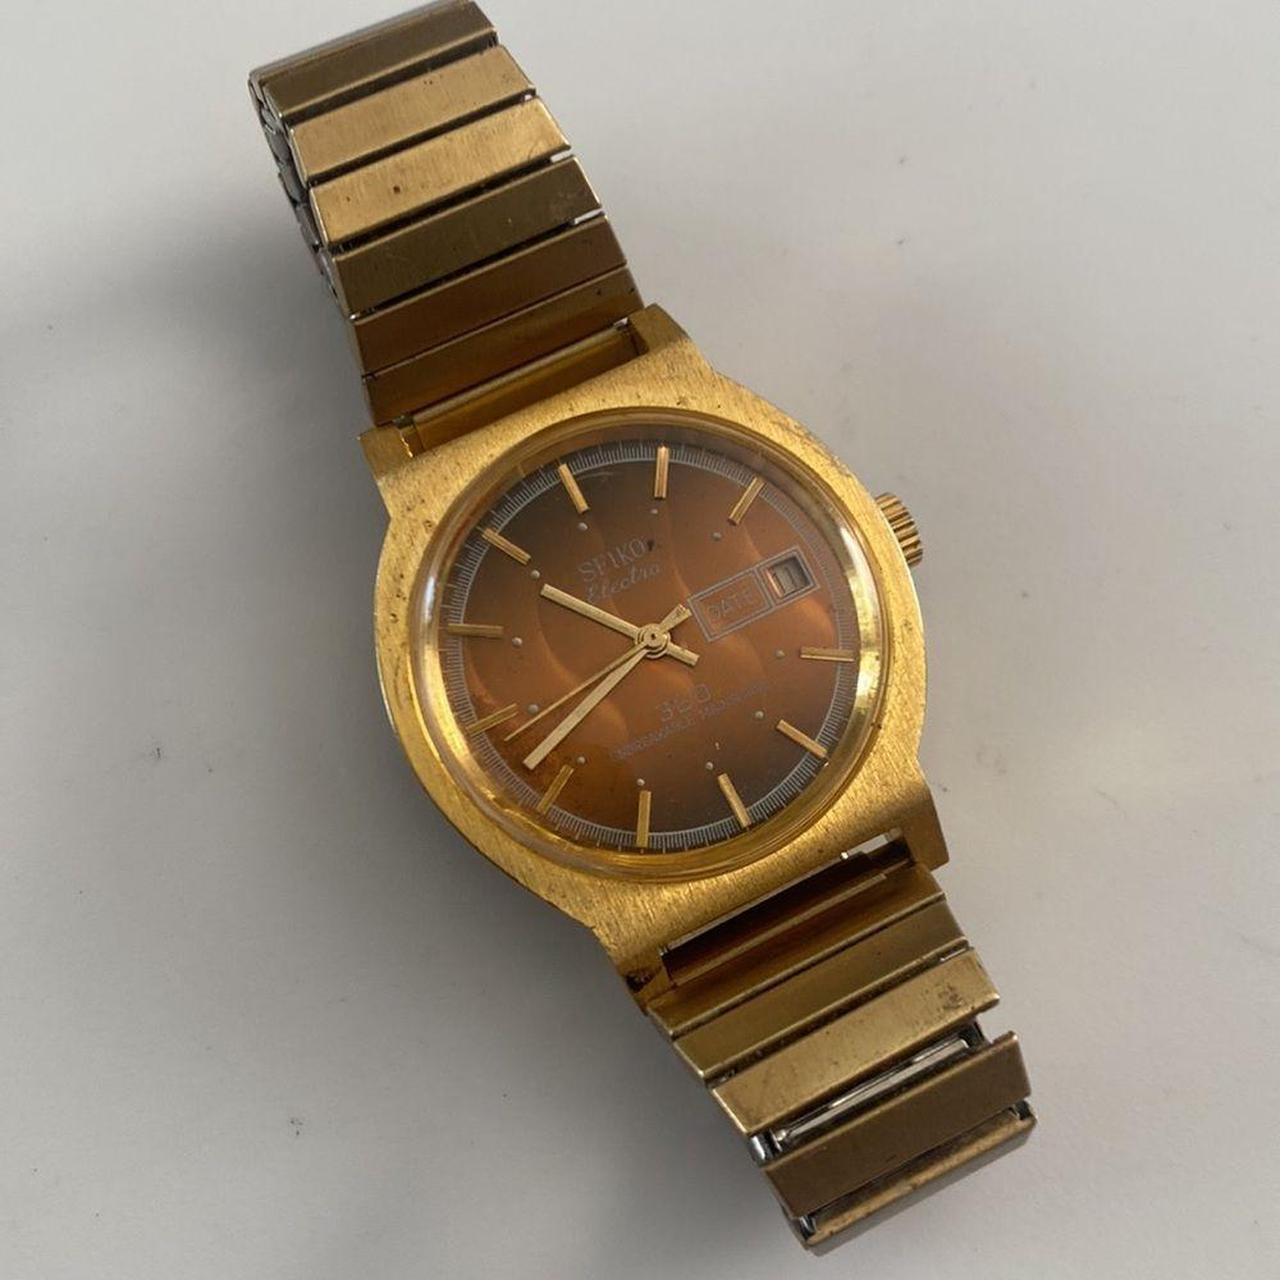 Product Image 2 - Watch is well loved but